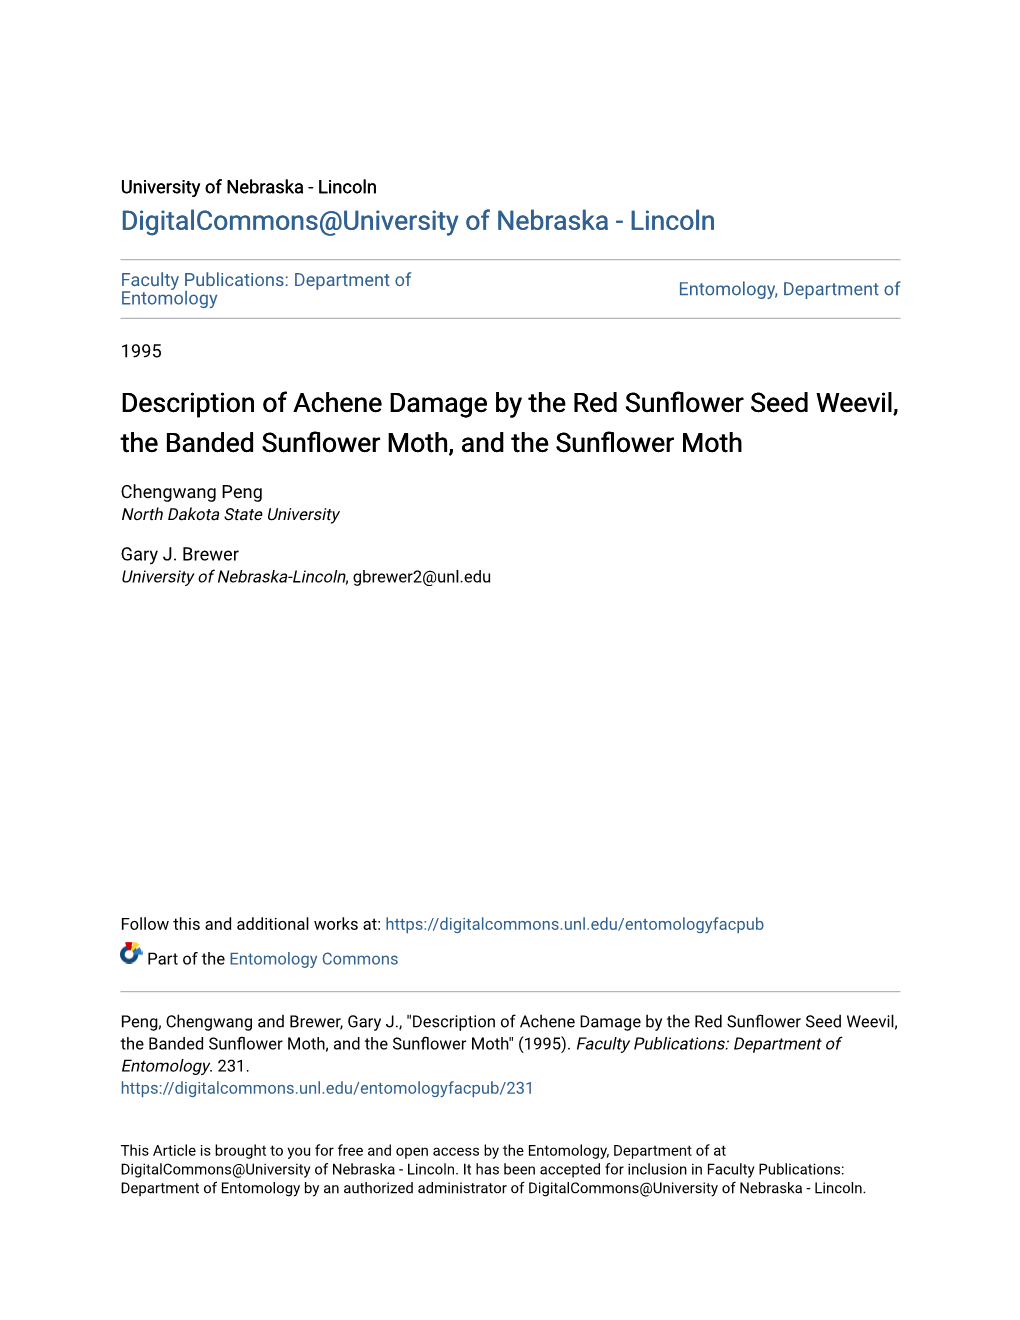 Description of Achene Damage by the Red Sunflower Seed Weevil, the Banded Sunflower Moth, and the Sunflower Moth